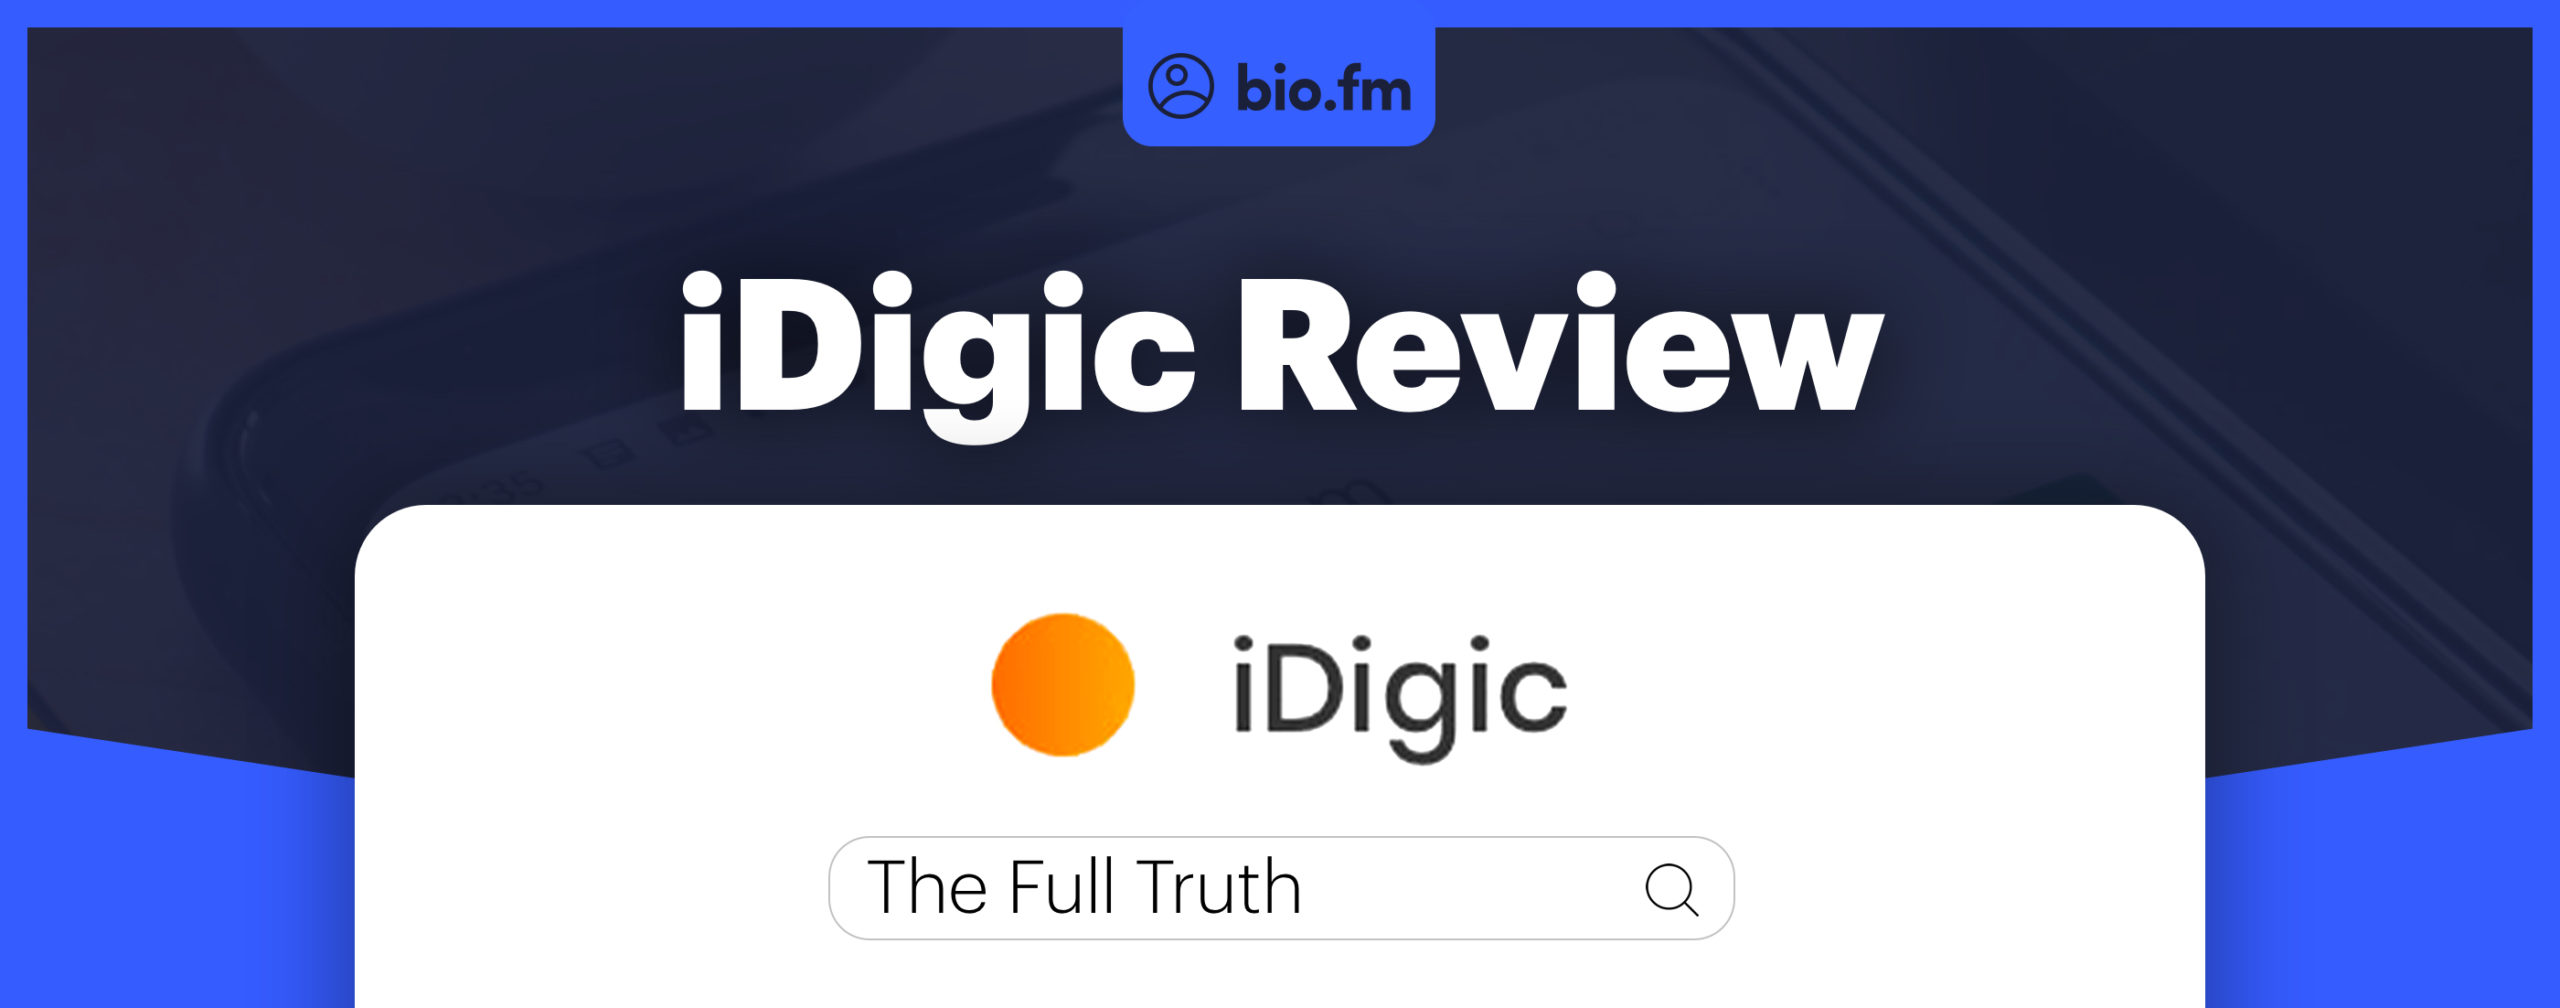 idigic review featured image